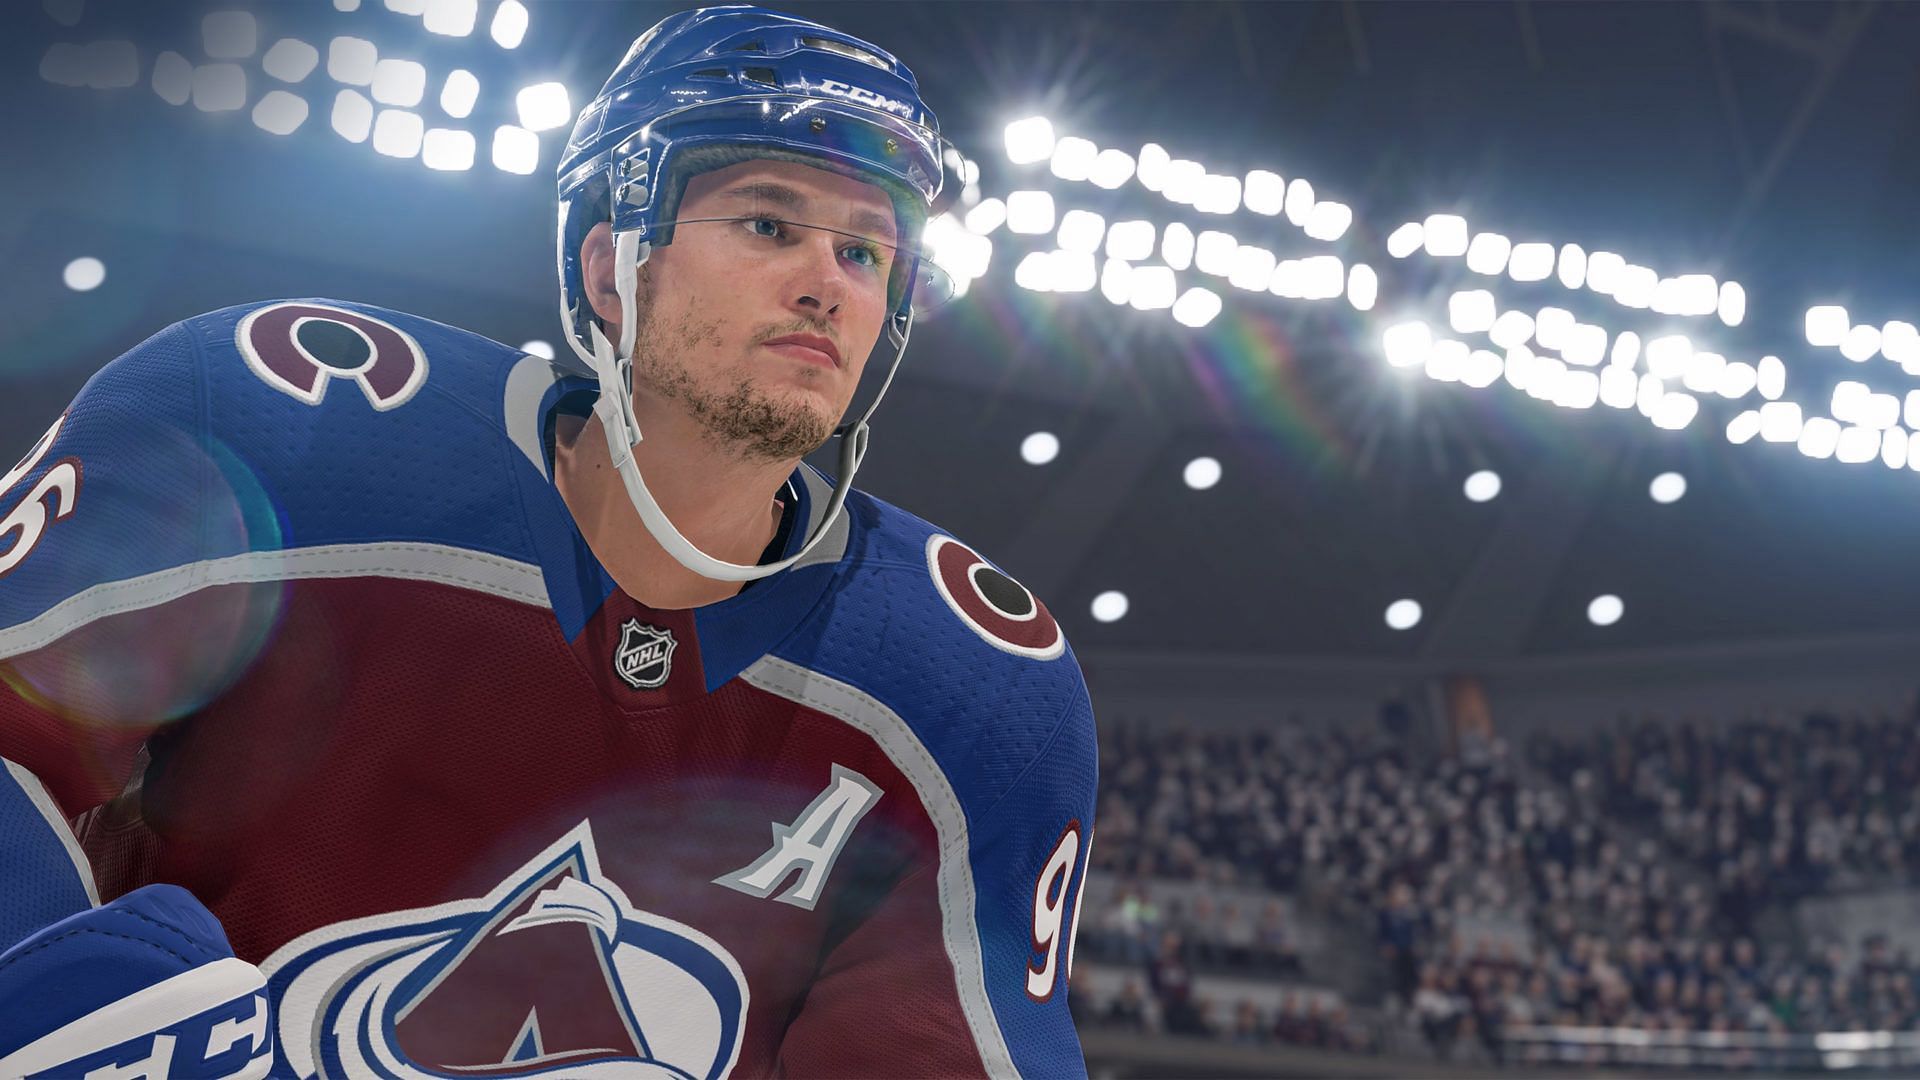 Players can pull out the goalie to gain advantage (Image via Electronic Arts)